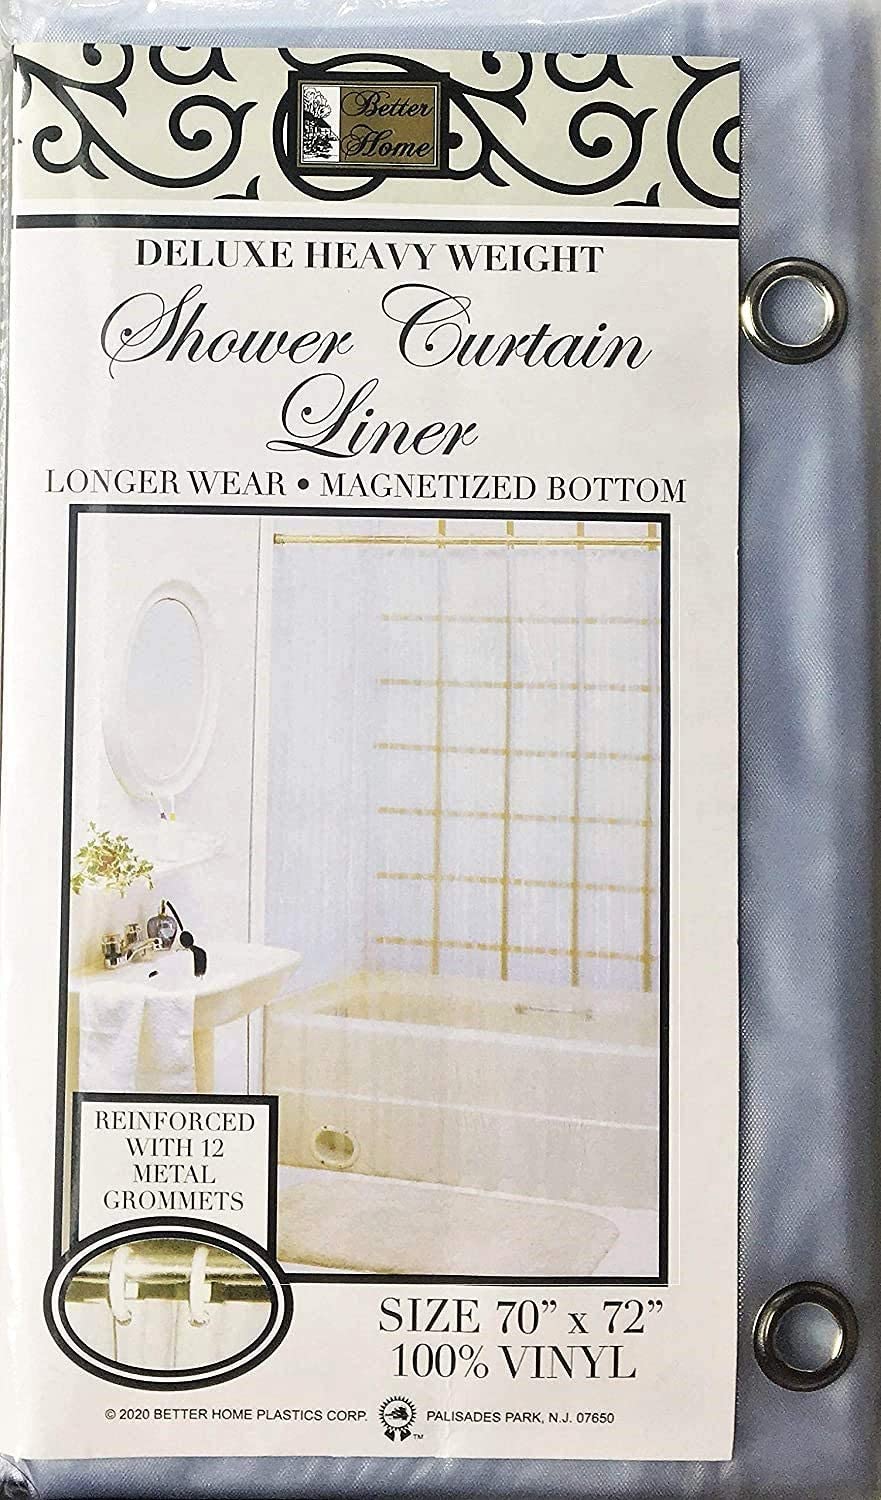 Deluxe Heavy Weight Shower Curtain Liner - 70" x 72"